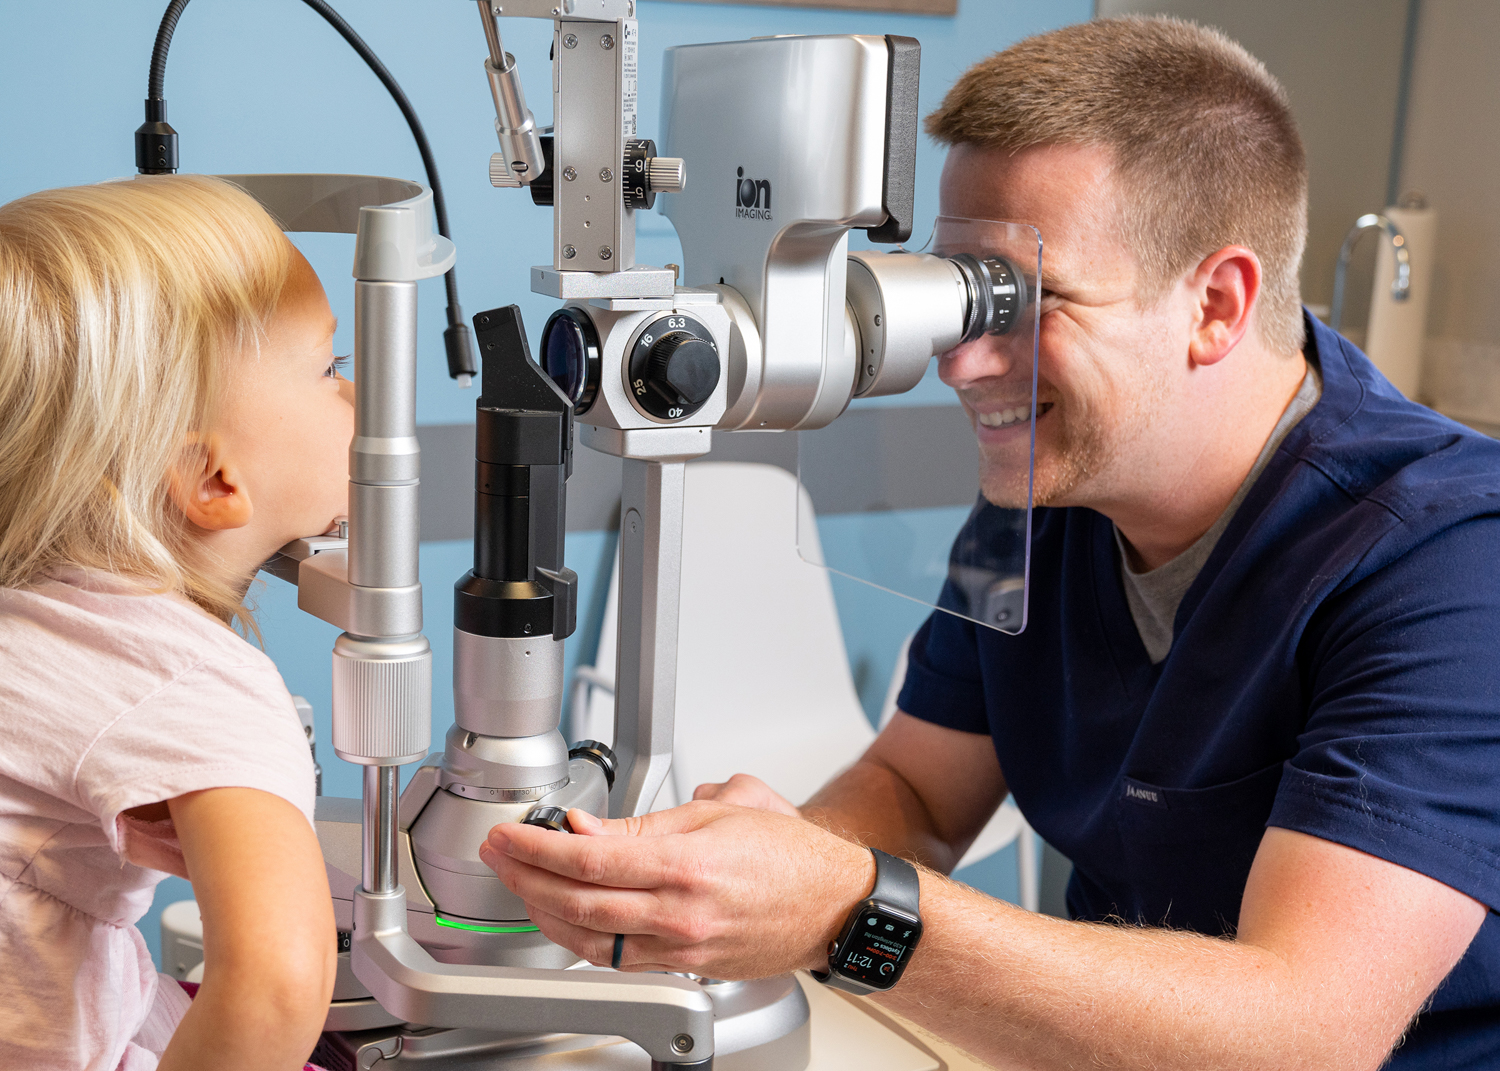 eye-exam-child-doctor-office-corporate-commercial-kelly-ann-photography-springboro-ohio